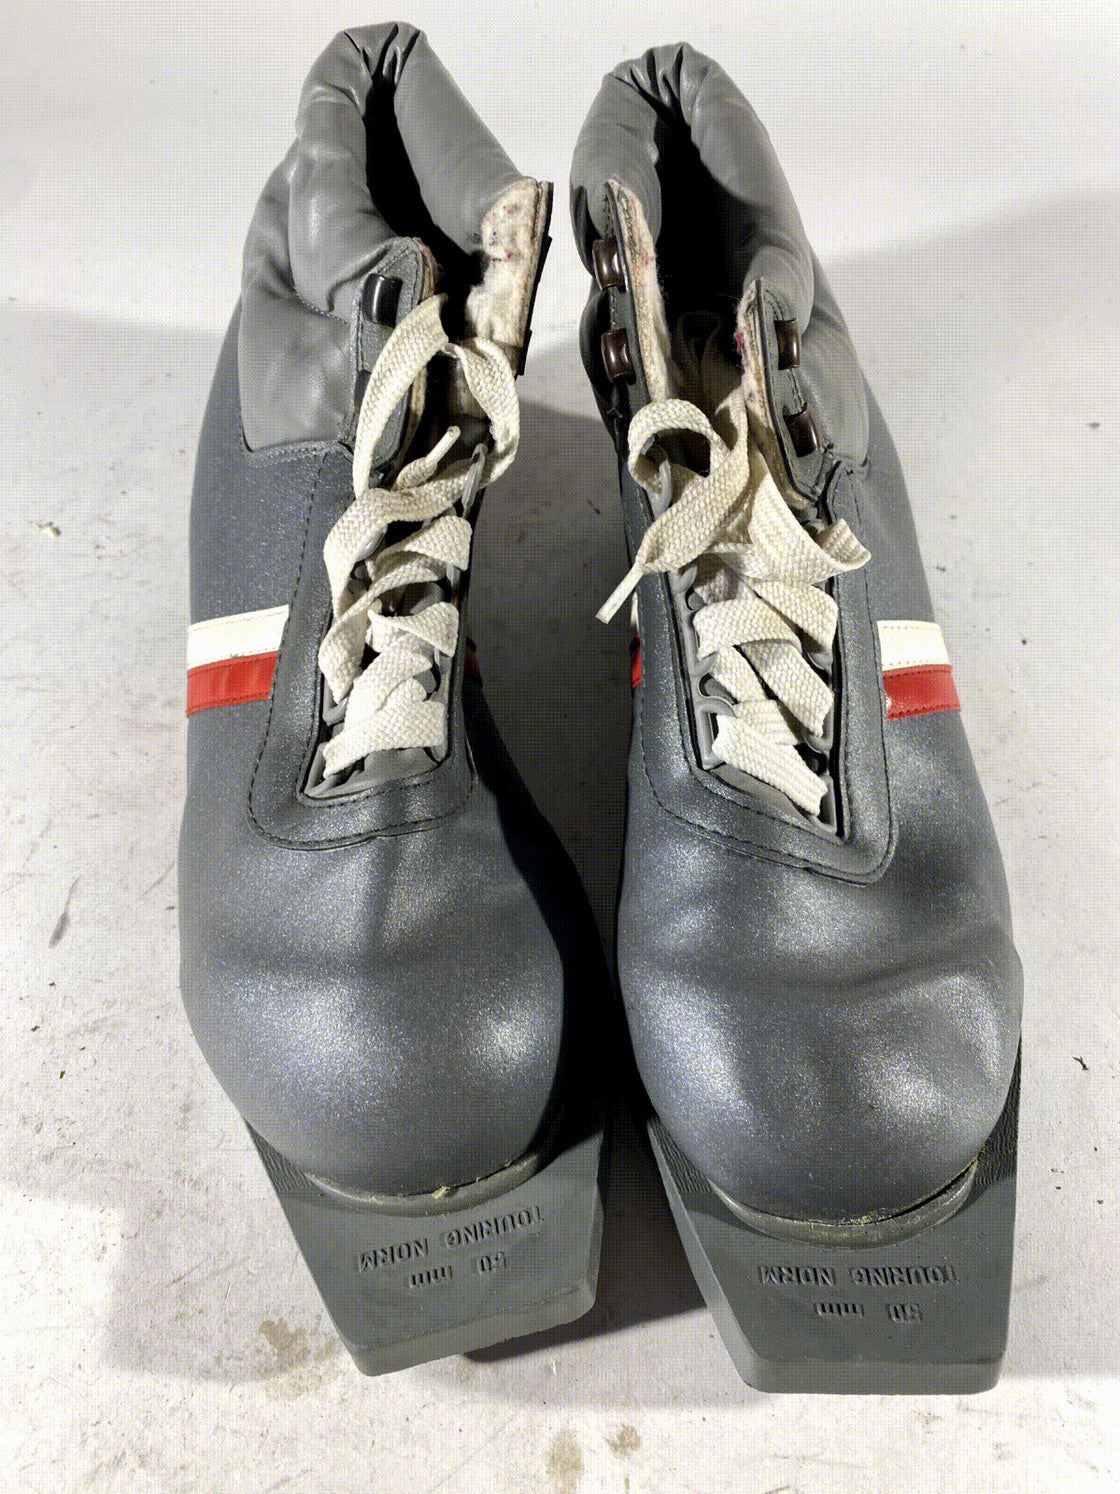 Vintage Cross Country Ski Boots Size EU40 US7.5 Touring Norm NN 50mm 3pin